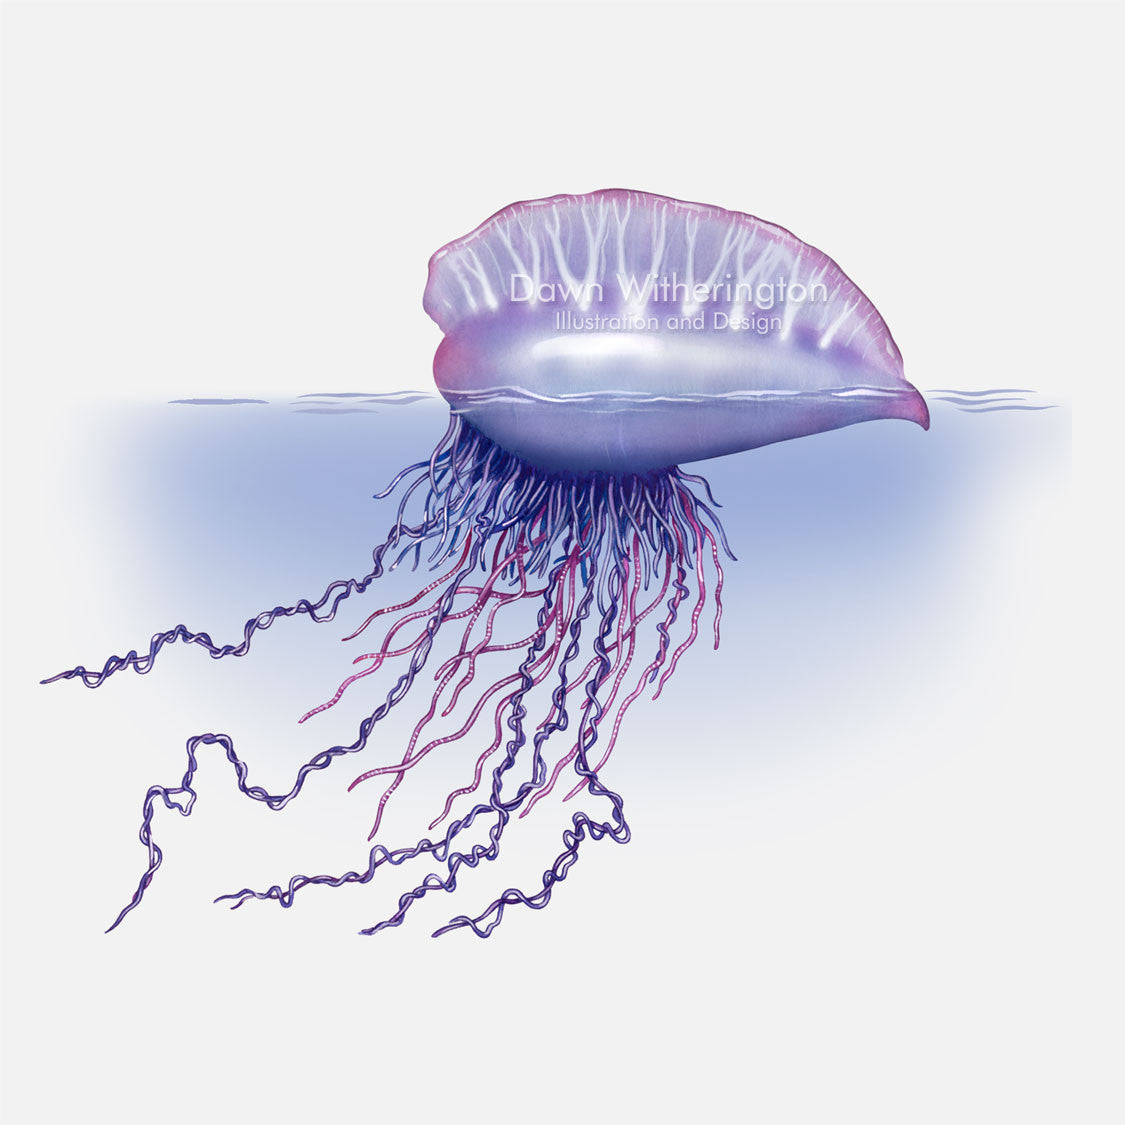 This beautiful illustration of a Portuguese man-o-war, Physalia physalis, is accurate in detail.